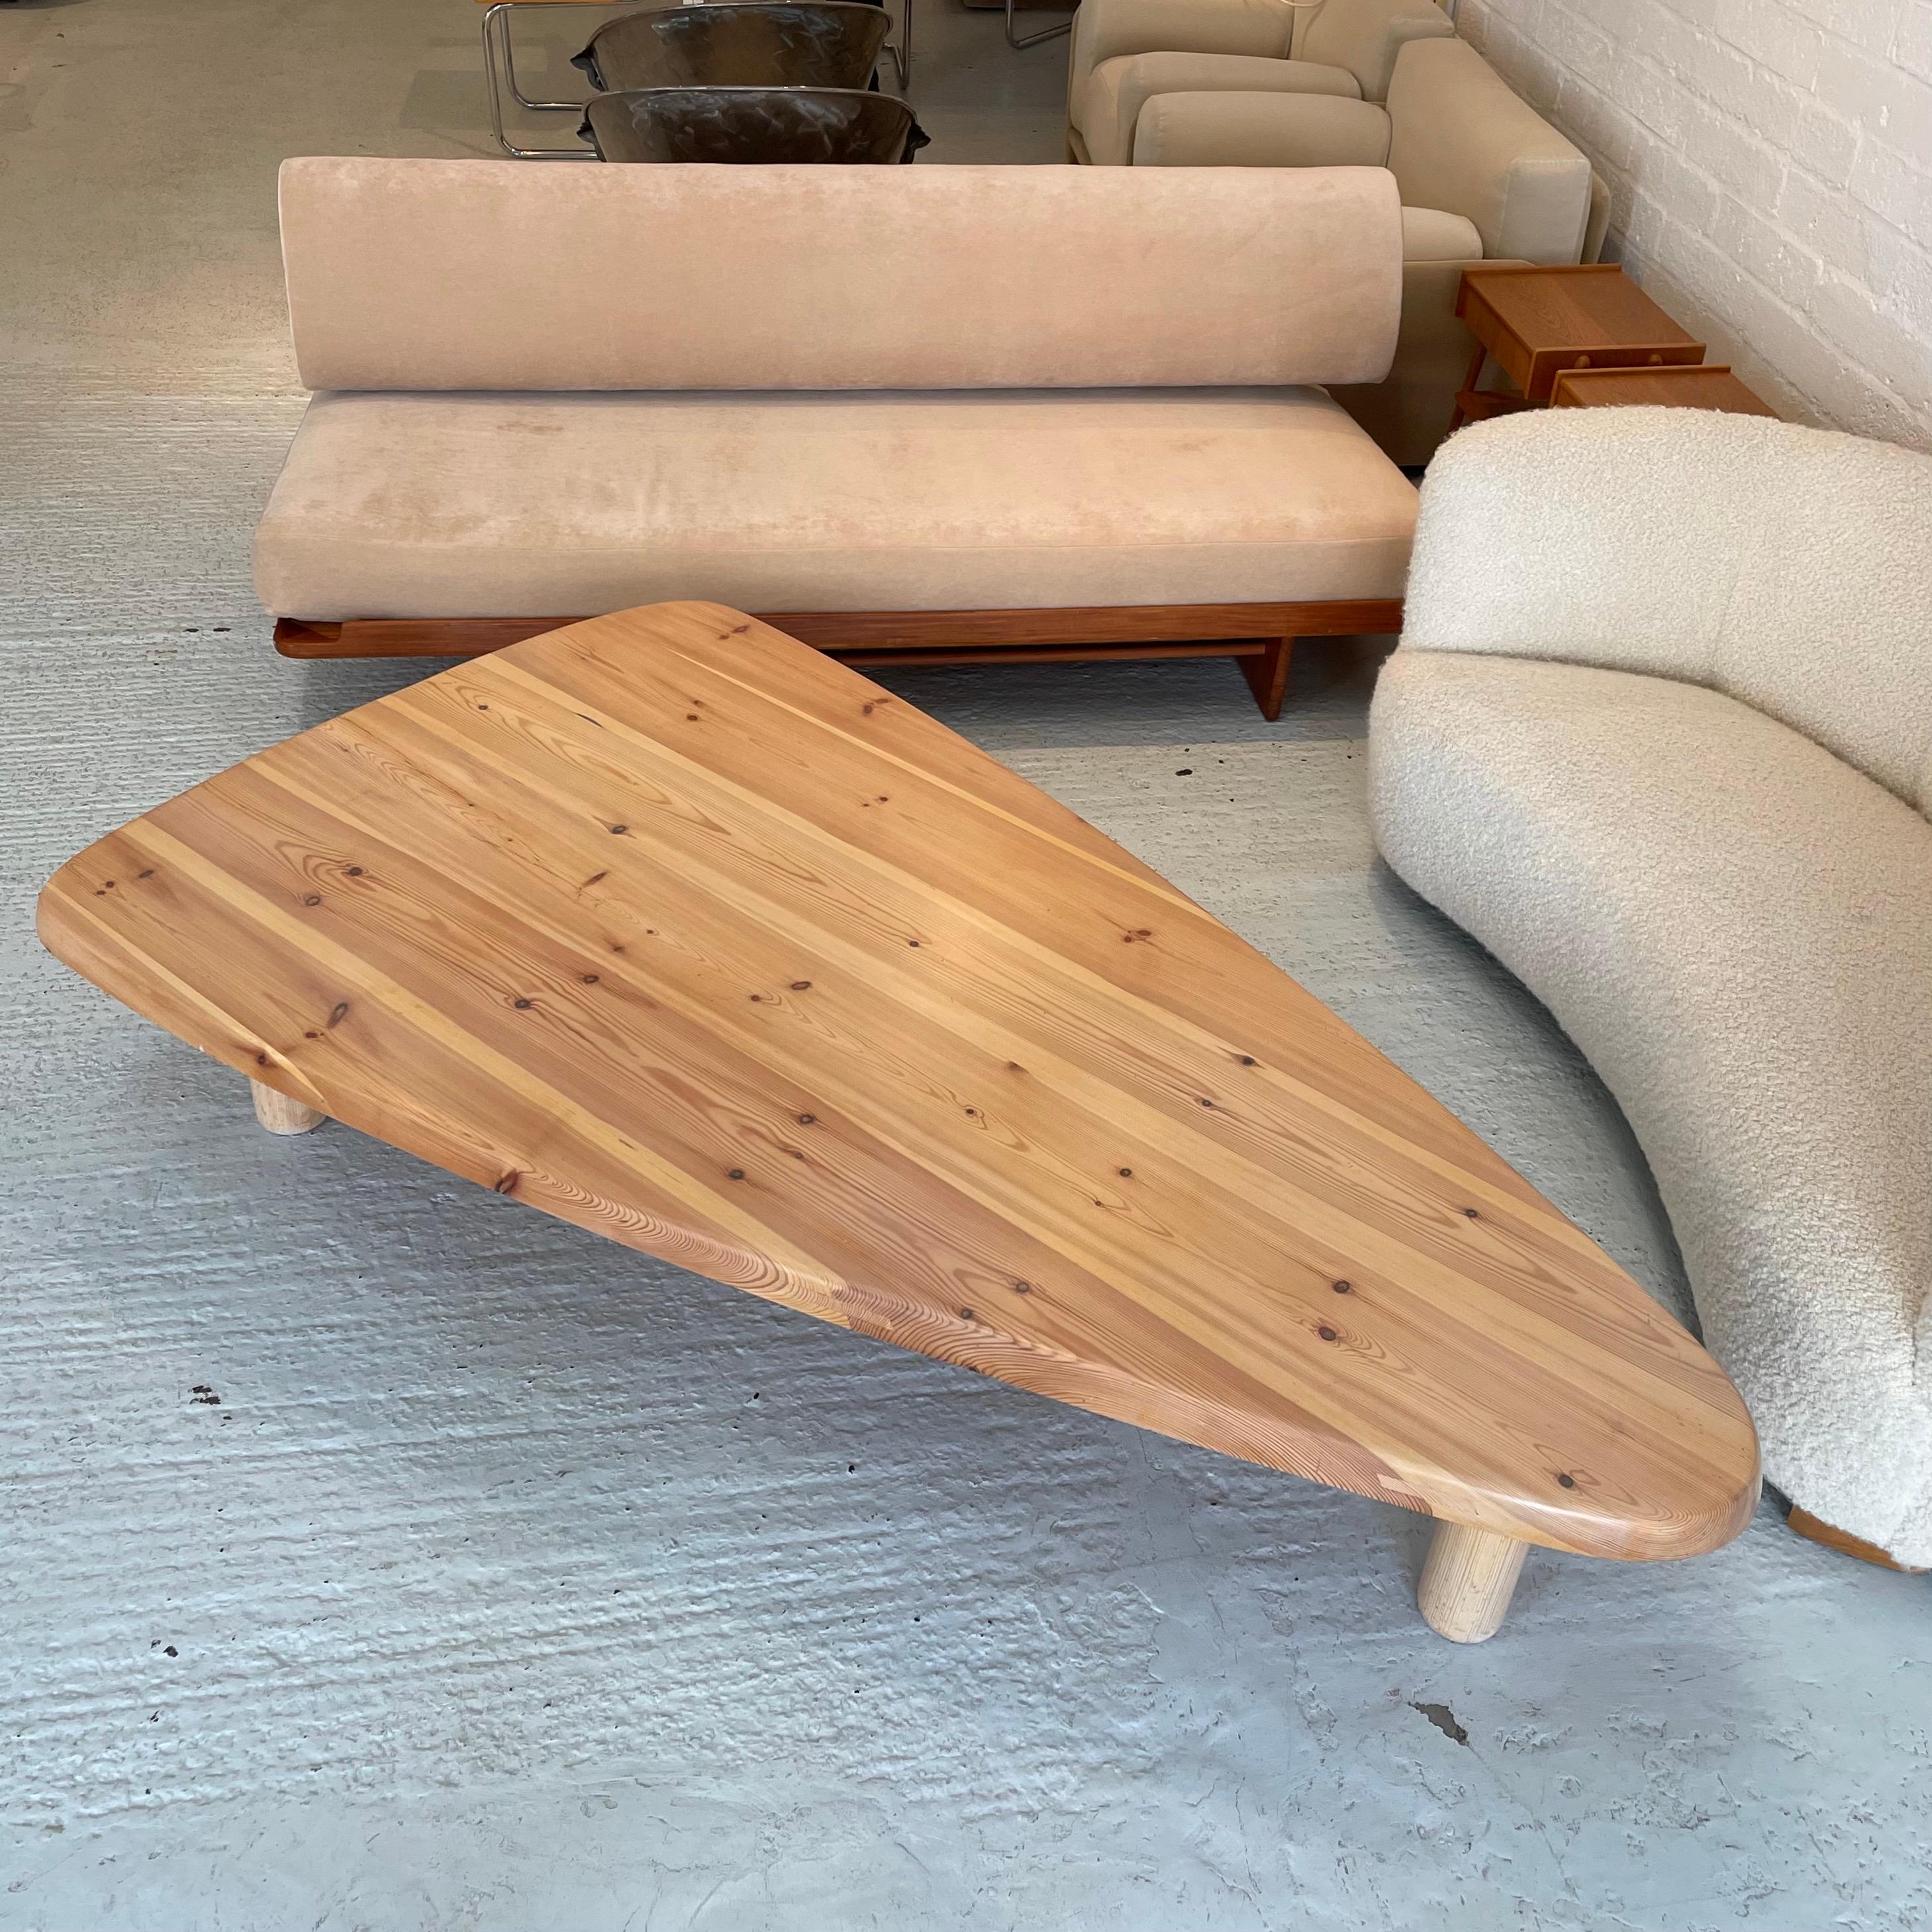 Height: 40cm
Width: 199cm
Depth: 112cm

Date: 1970s
Materials: Pine

Description: A large vintage wooden living room coffee table of French manufacture from the 1960s. The large low coffee table is made entirely of pine wood, with beautiful grains,